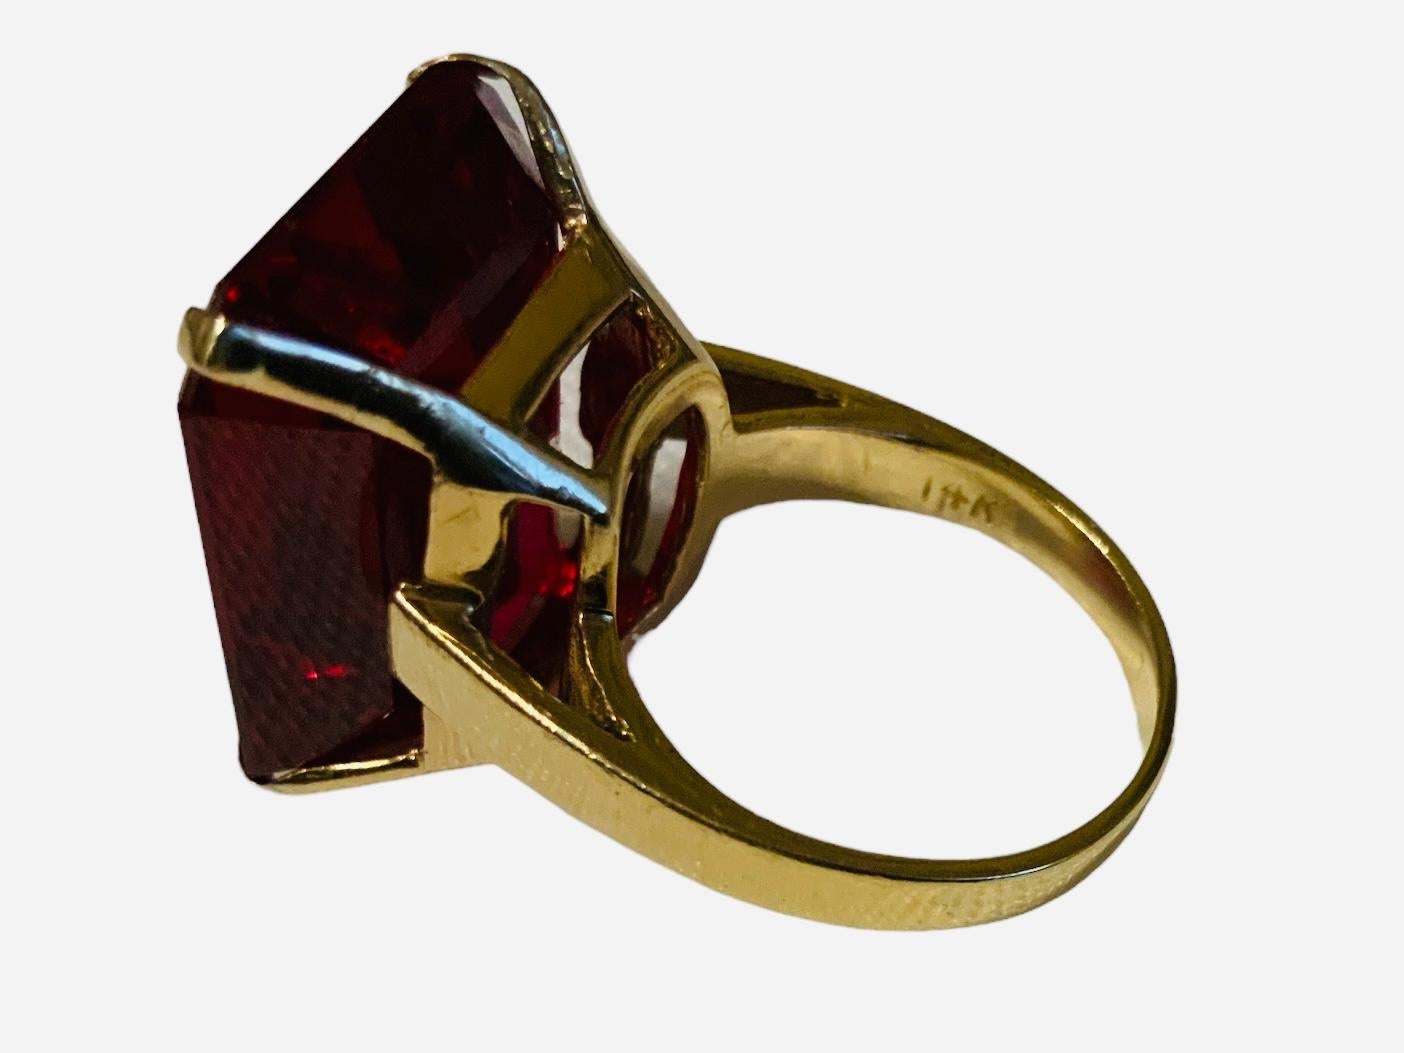 Women's or Men's 14K Gold Ruby Cocktail Ring For Sale